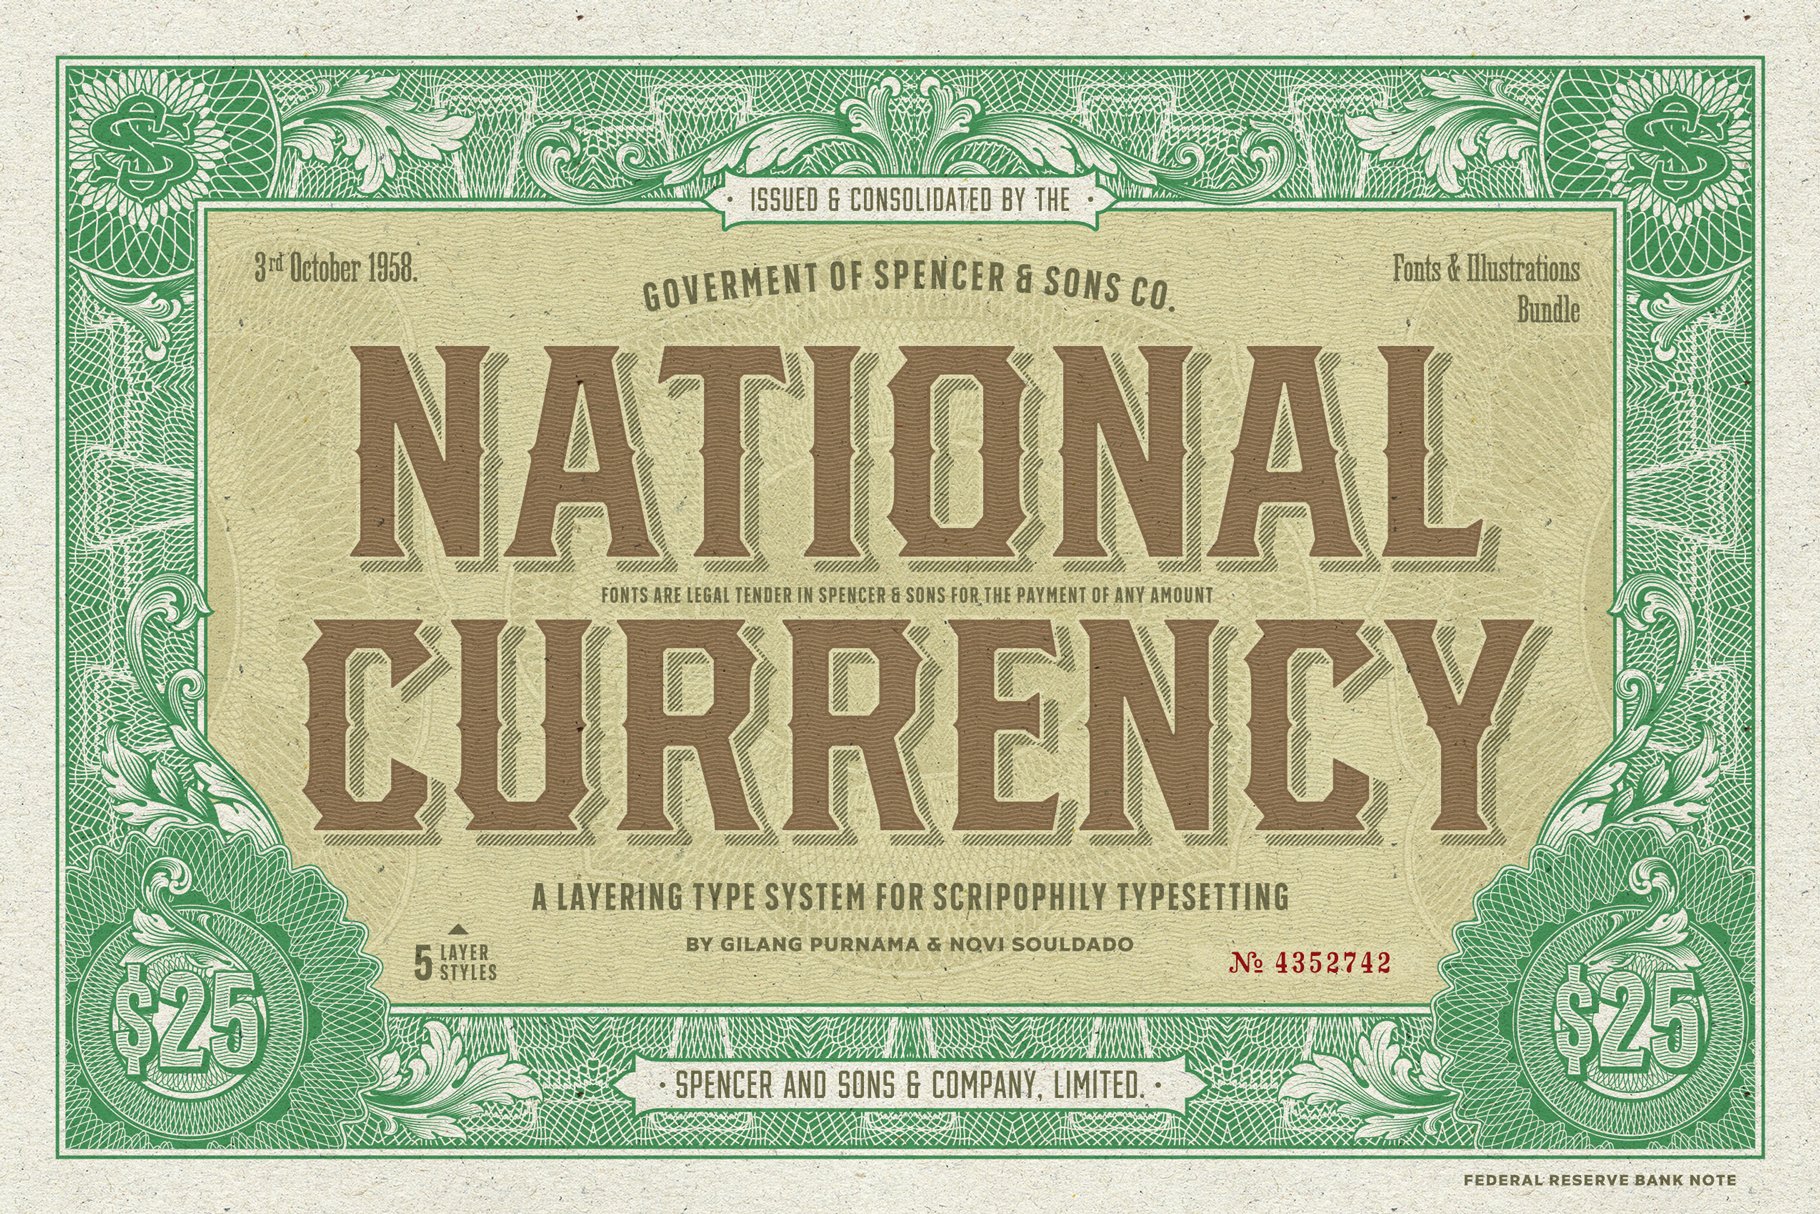 S&S National Currency Font Bundle cover image.